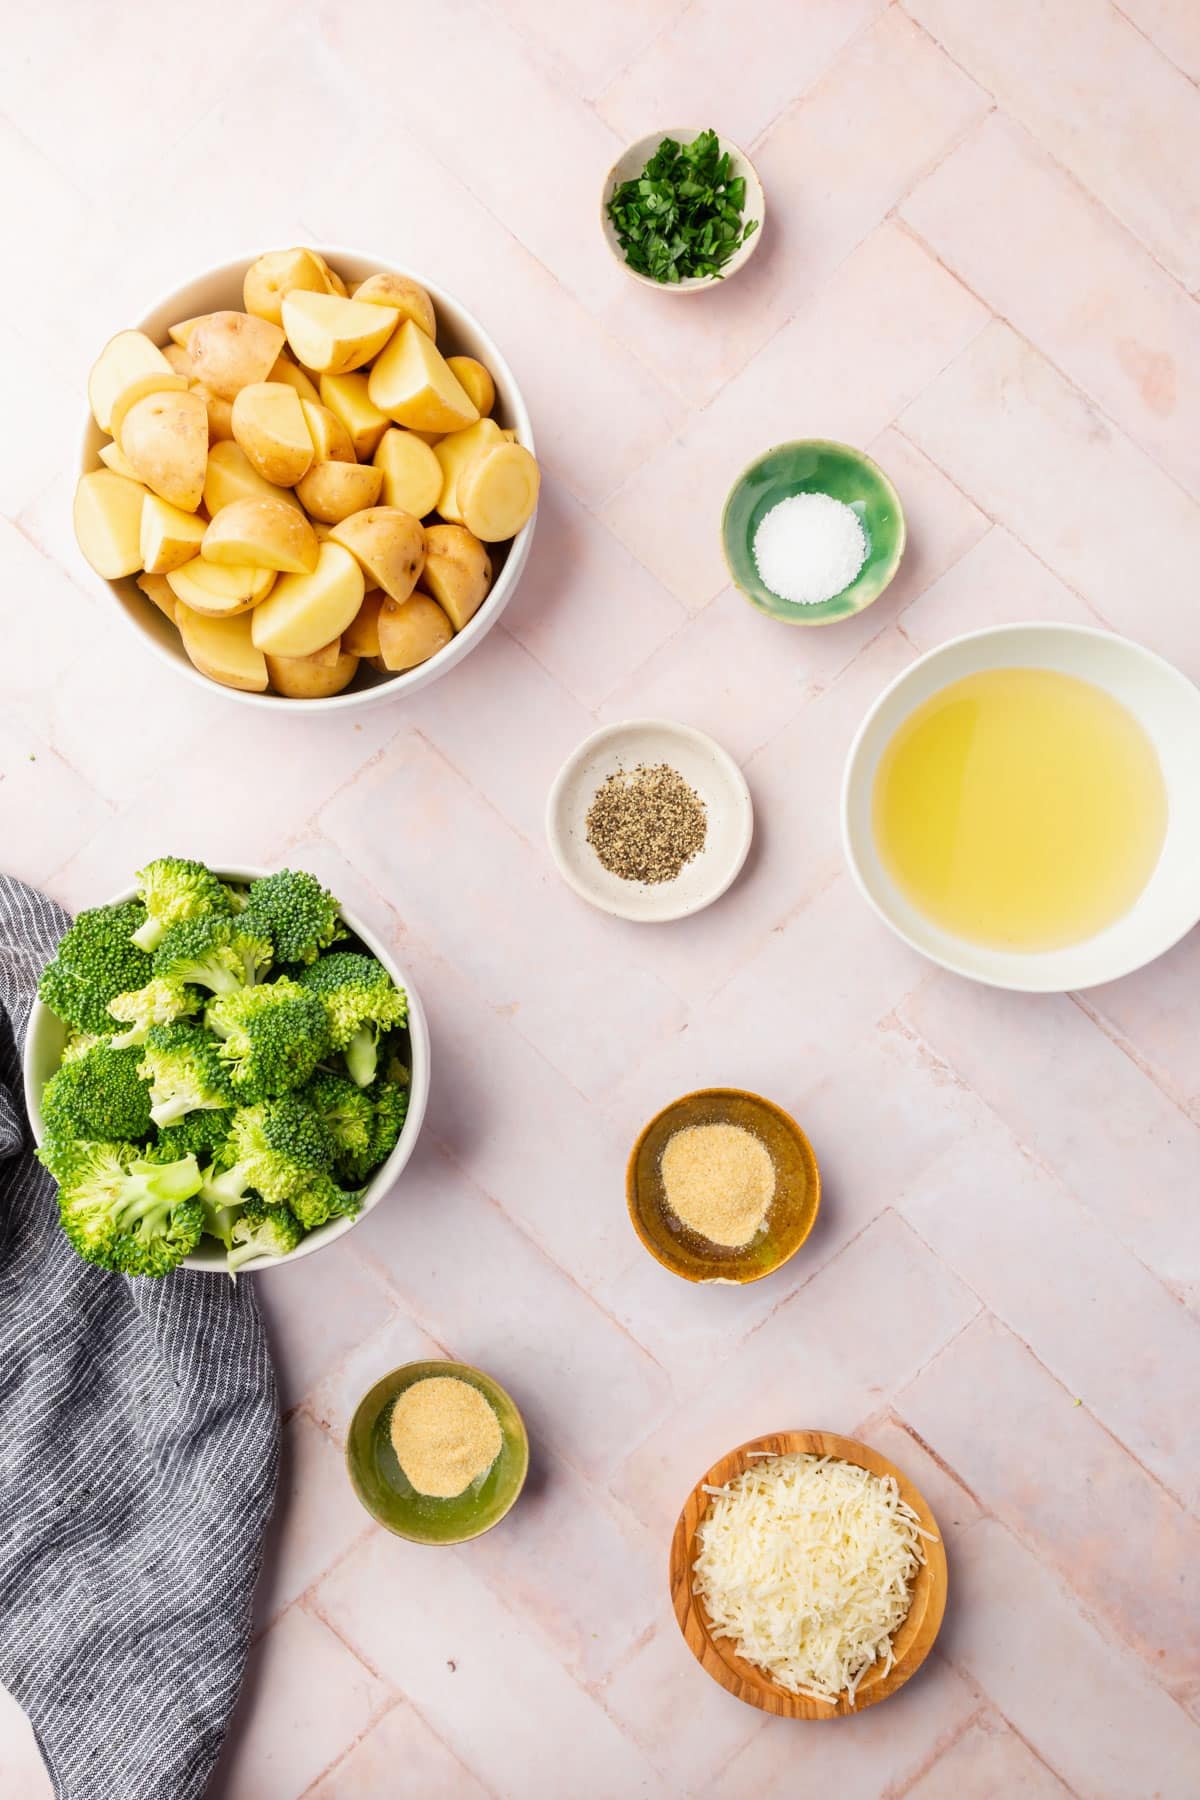 An overhead view of ingredients in bowls to make roasted broccoli ad potatoes, including baby potatoes, broccoli, parsley, pepper, salt, parmesan cheese, olive oil, garlic powder, and onion powder.